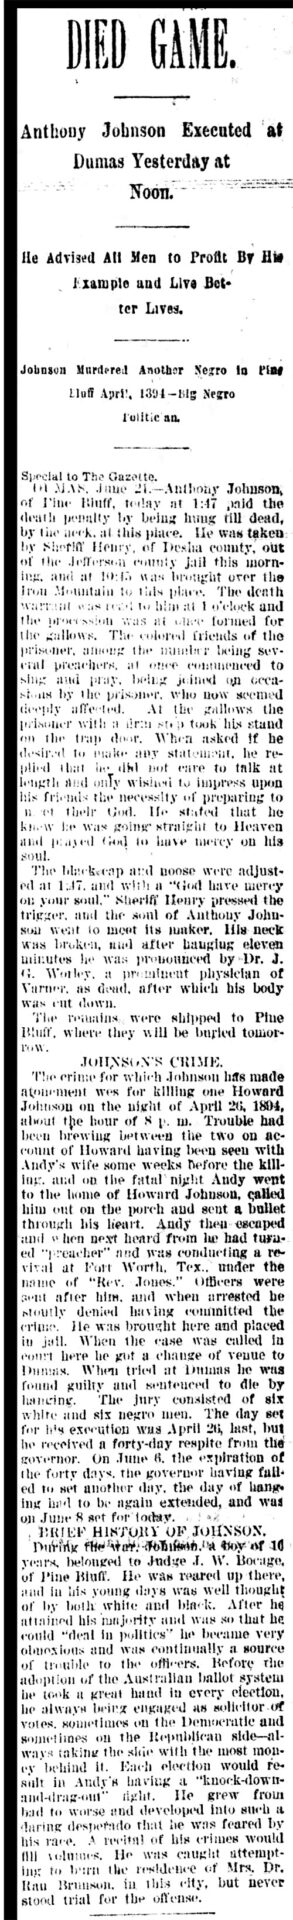 "Died Game" newspaper clipping